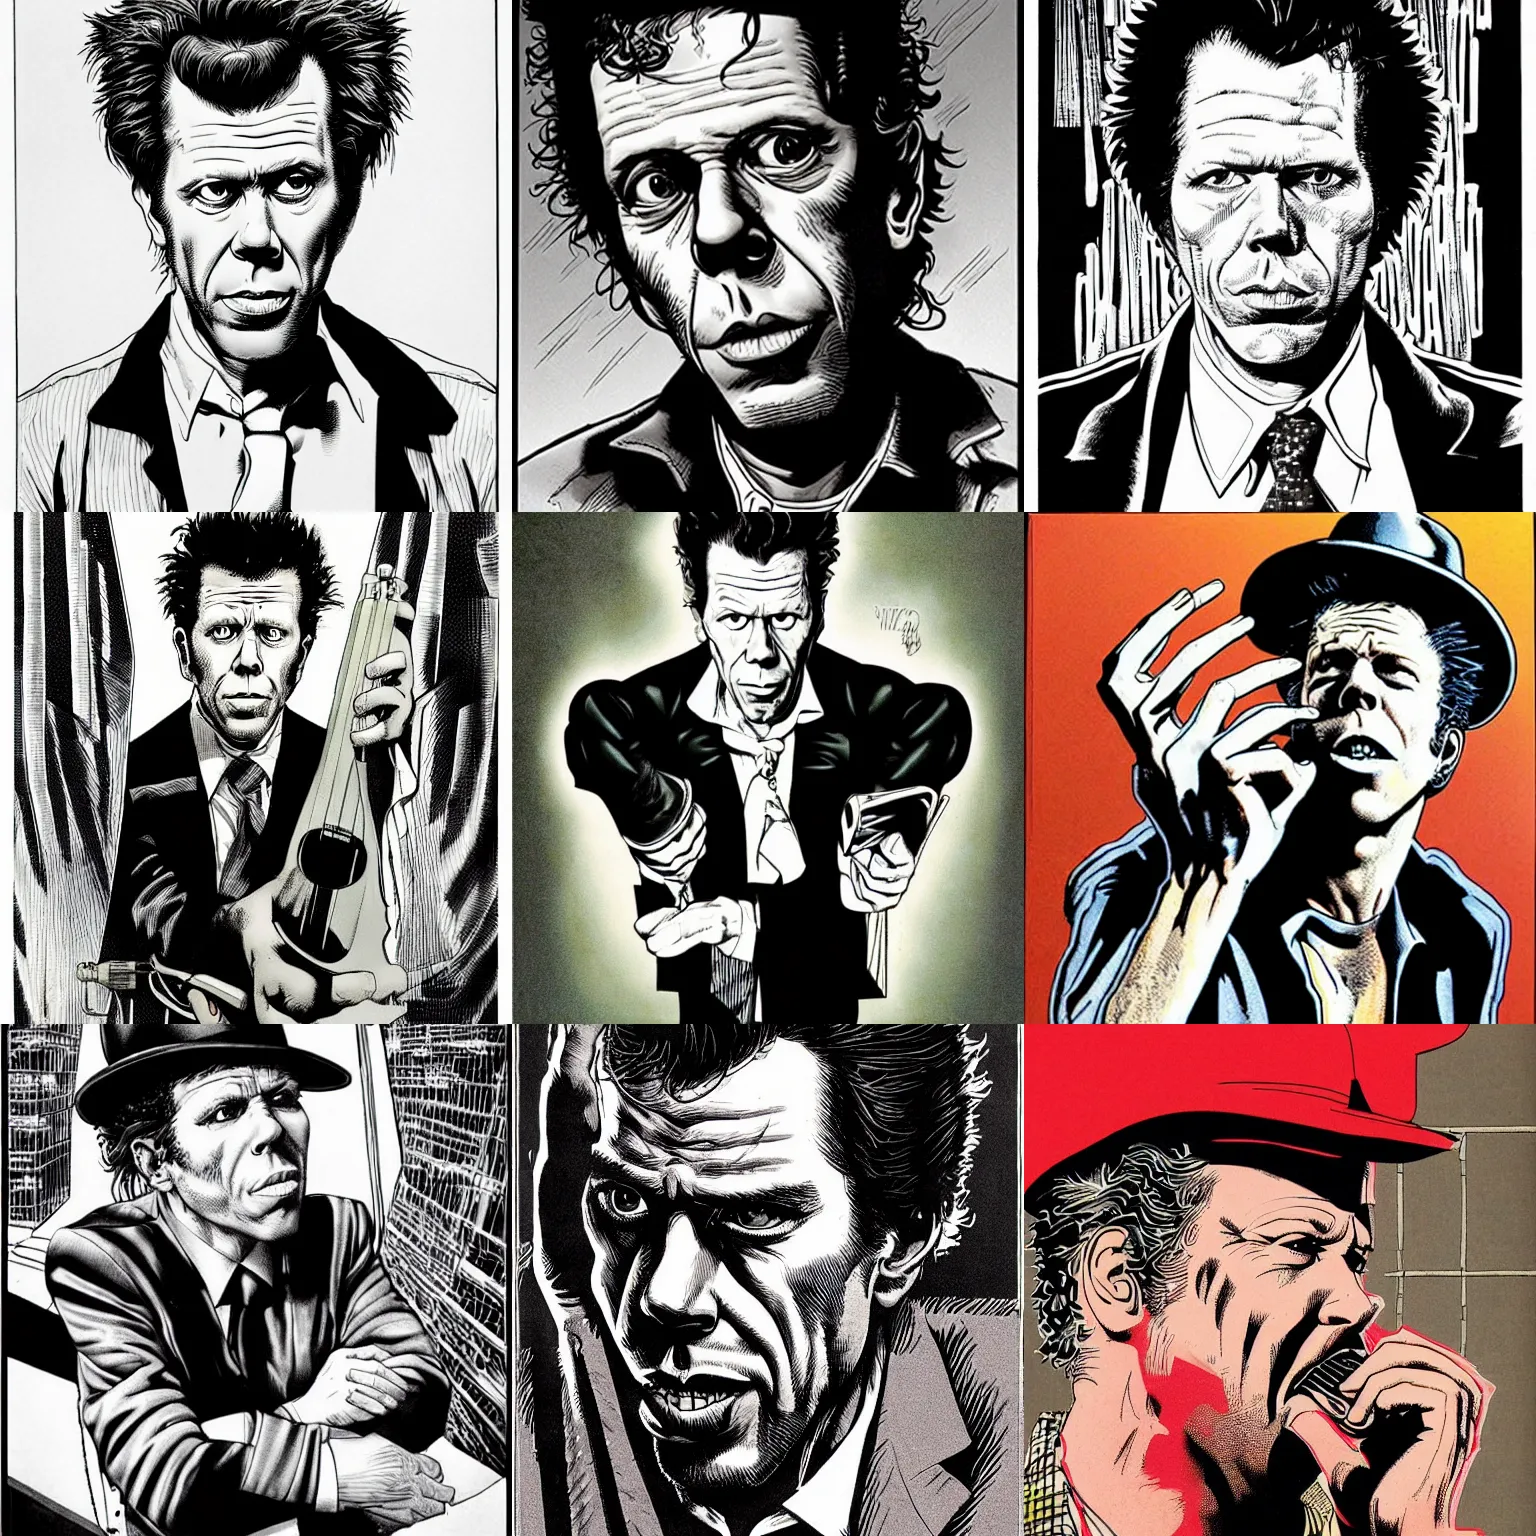 Prompt: Tom Waits by Brian Bolland